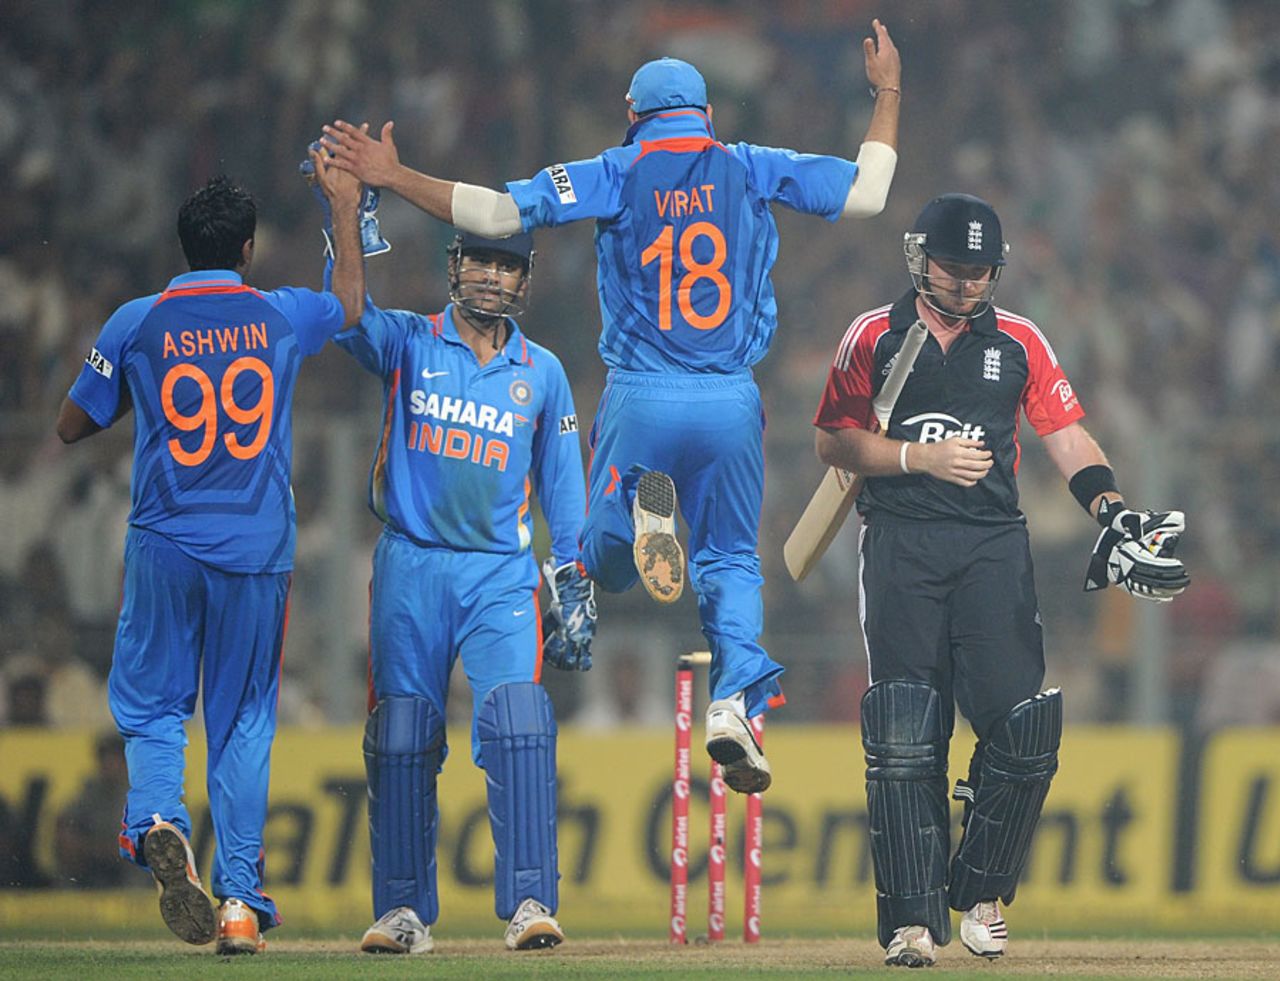 India celebrate as Ian Bell departs early in the collapse, India v England, 5th ODI, Eden Gardens, October 25 2011